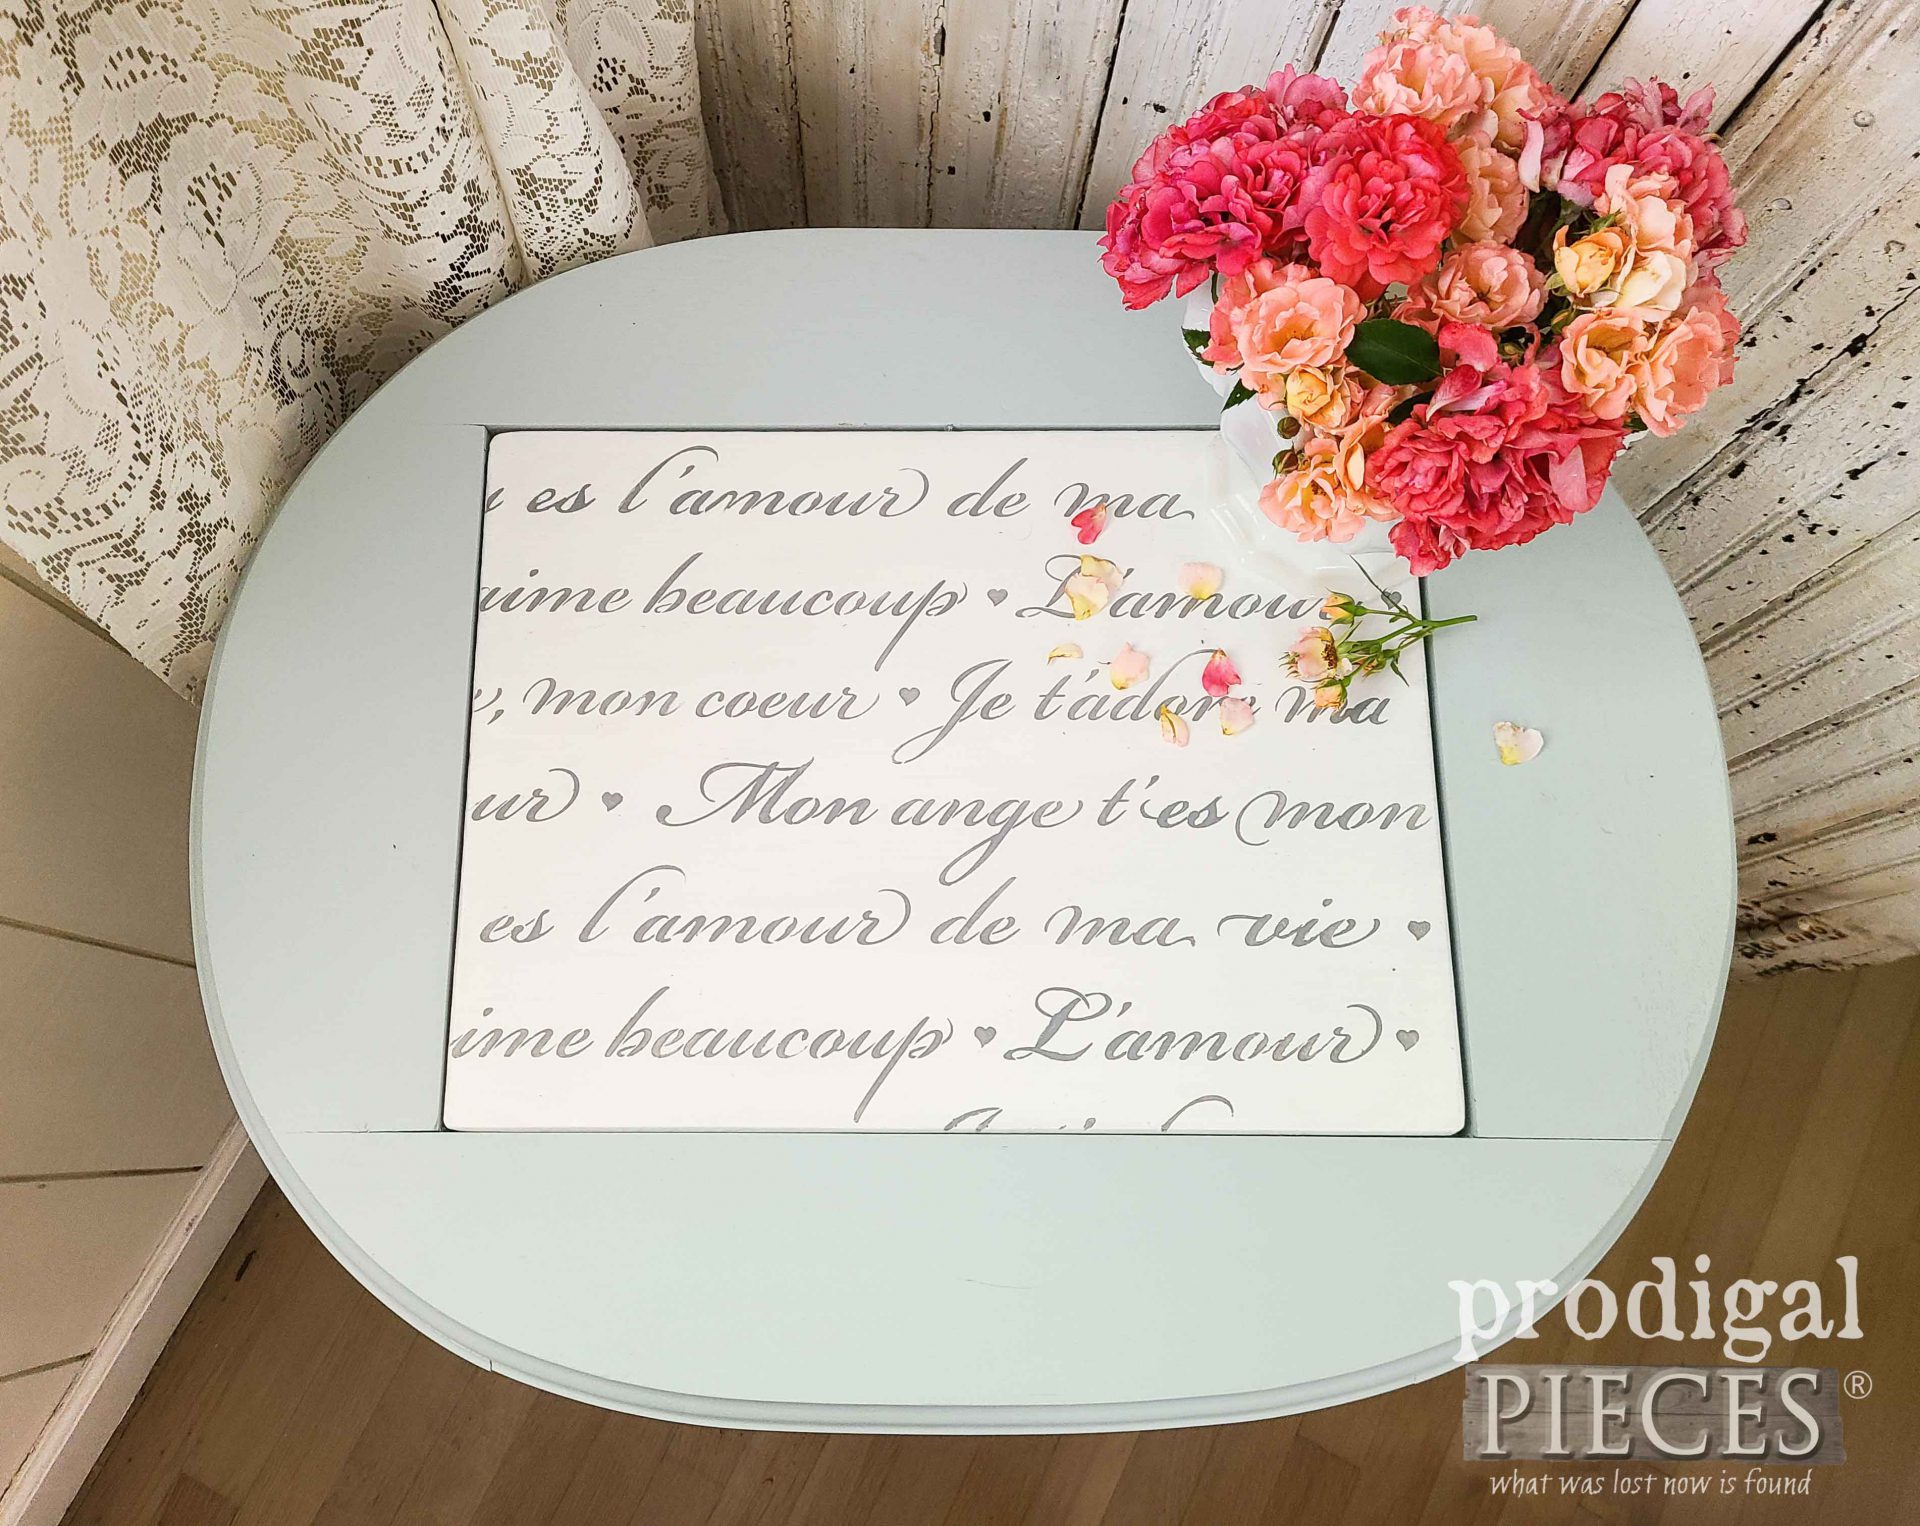 French Script Table Top DIY Painted Marble by Larissa of Prodigal Pieces | prodigalpieces.com #prodigalpieces #furniture #diy #homedecor